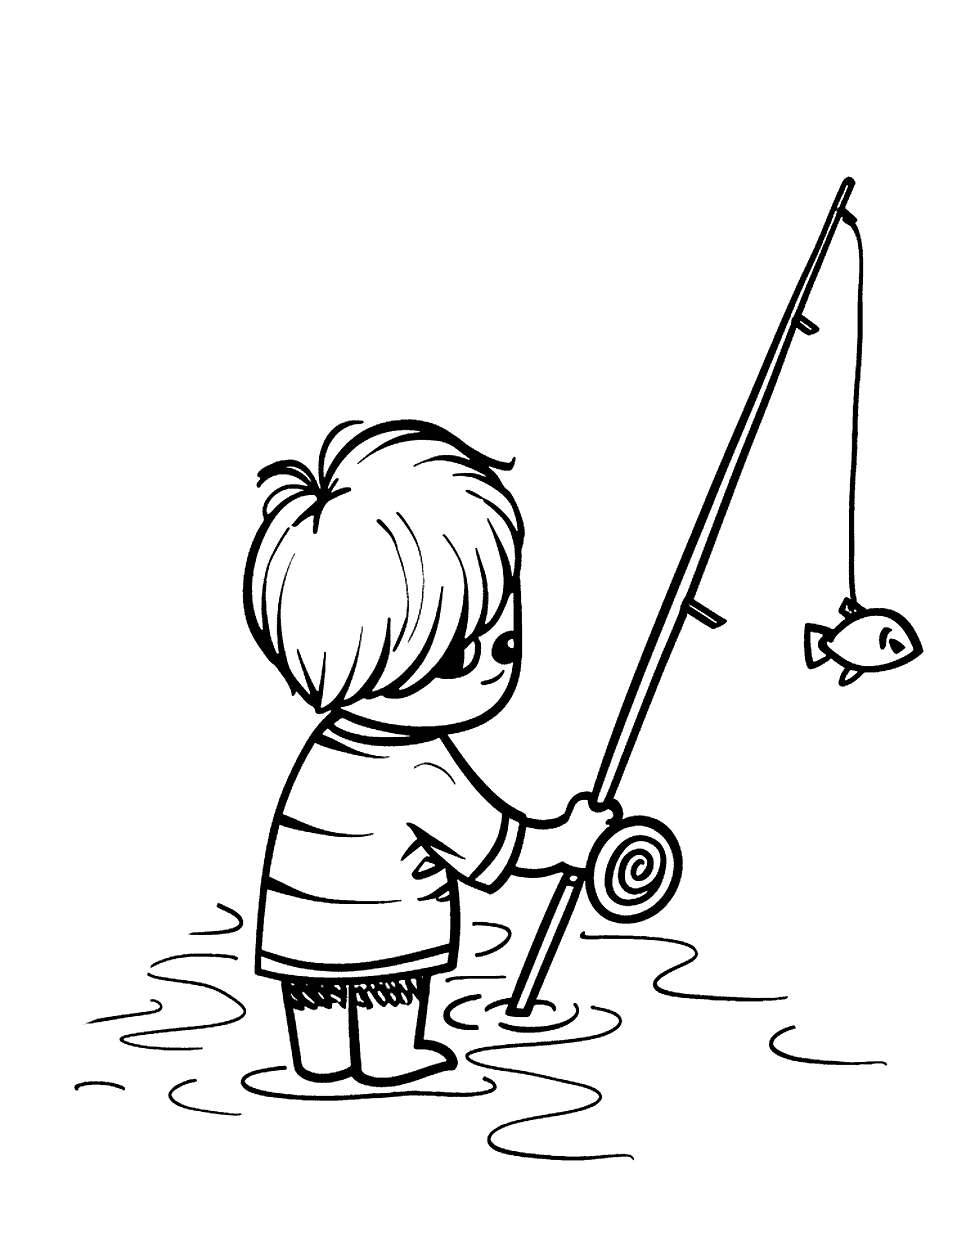 Fishing at the Pond Toddler Coloring Page - A child with a fishing pole at a pond, with a fish on the line.